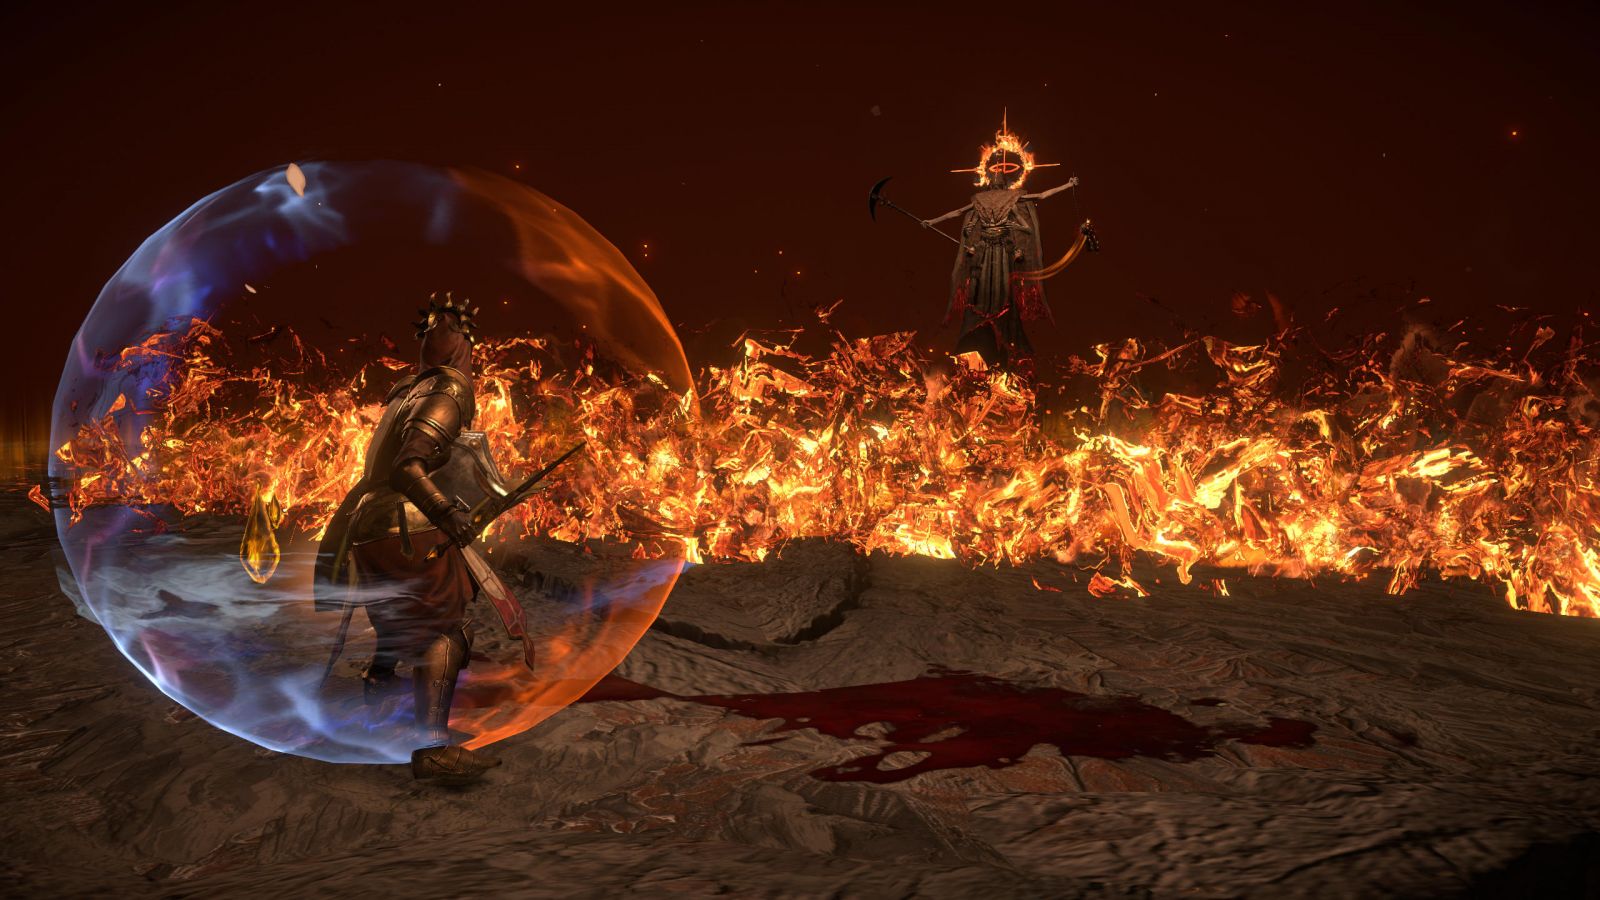 Path Of Exile: Sentinel Reveals Release Dates, Trailer & Boatload Of  Gameplay Additions - Noisy Pixel